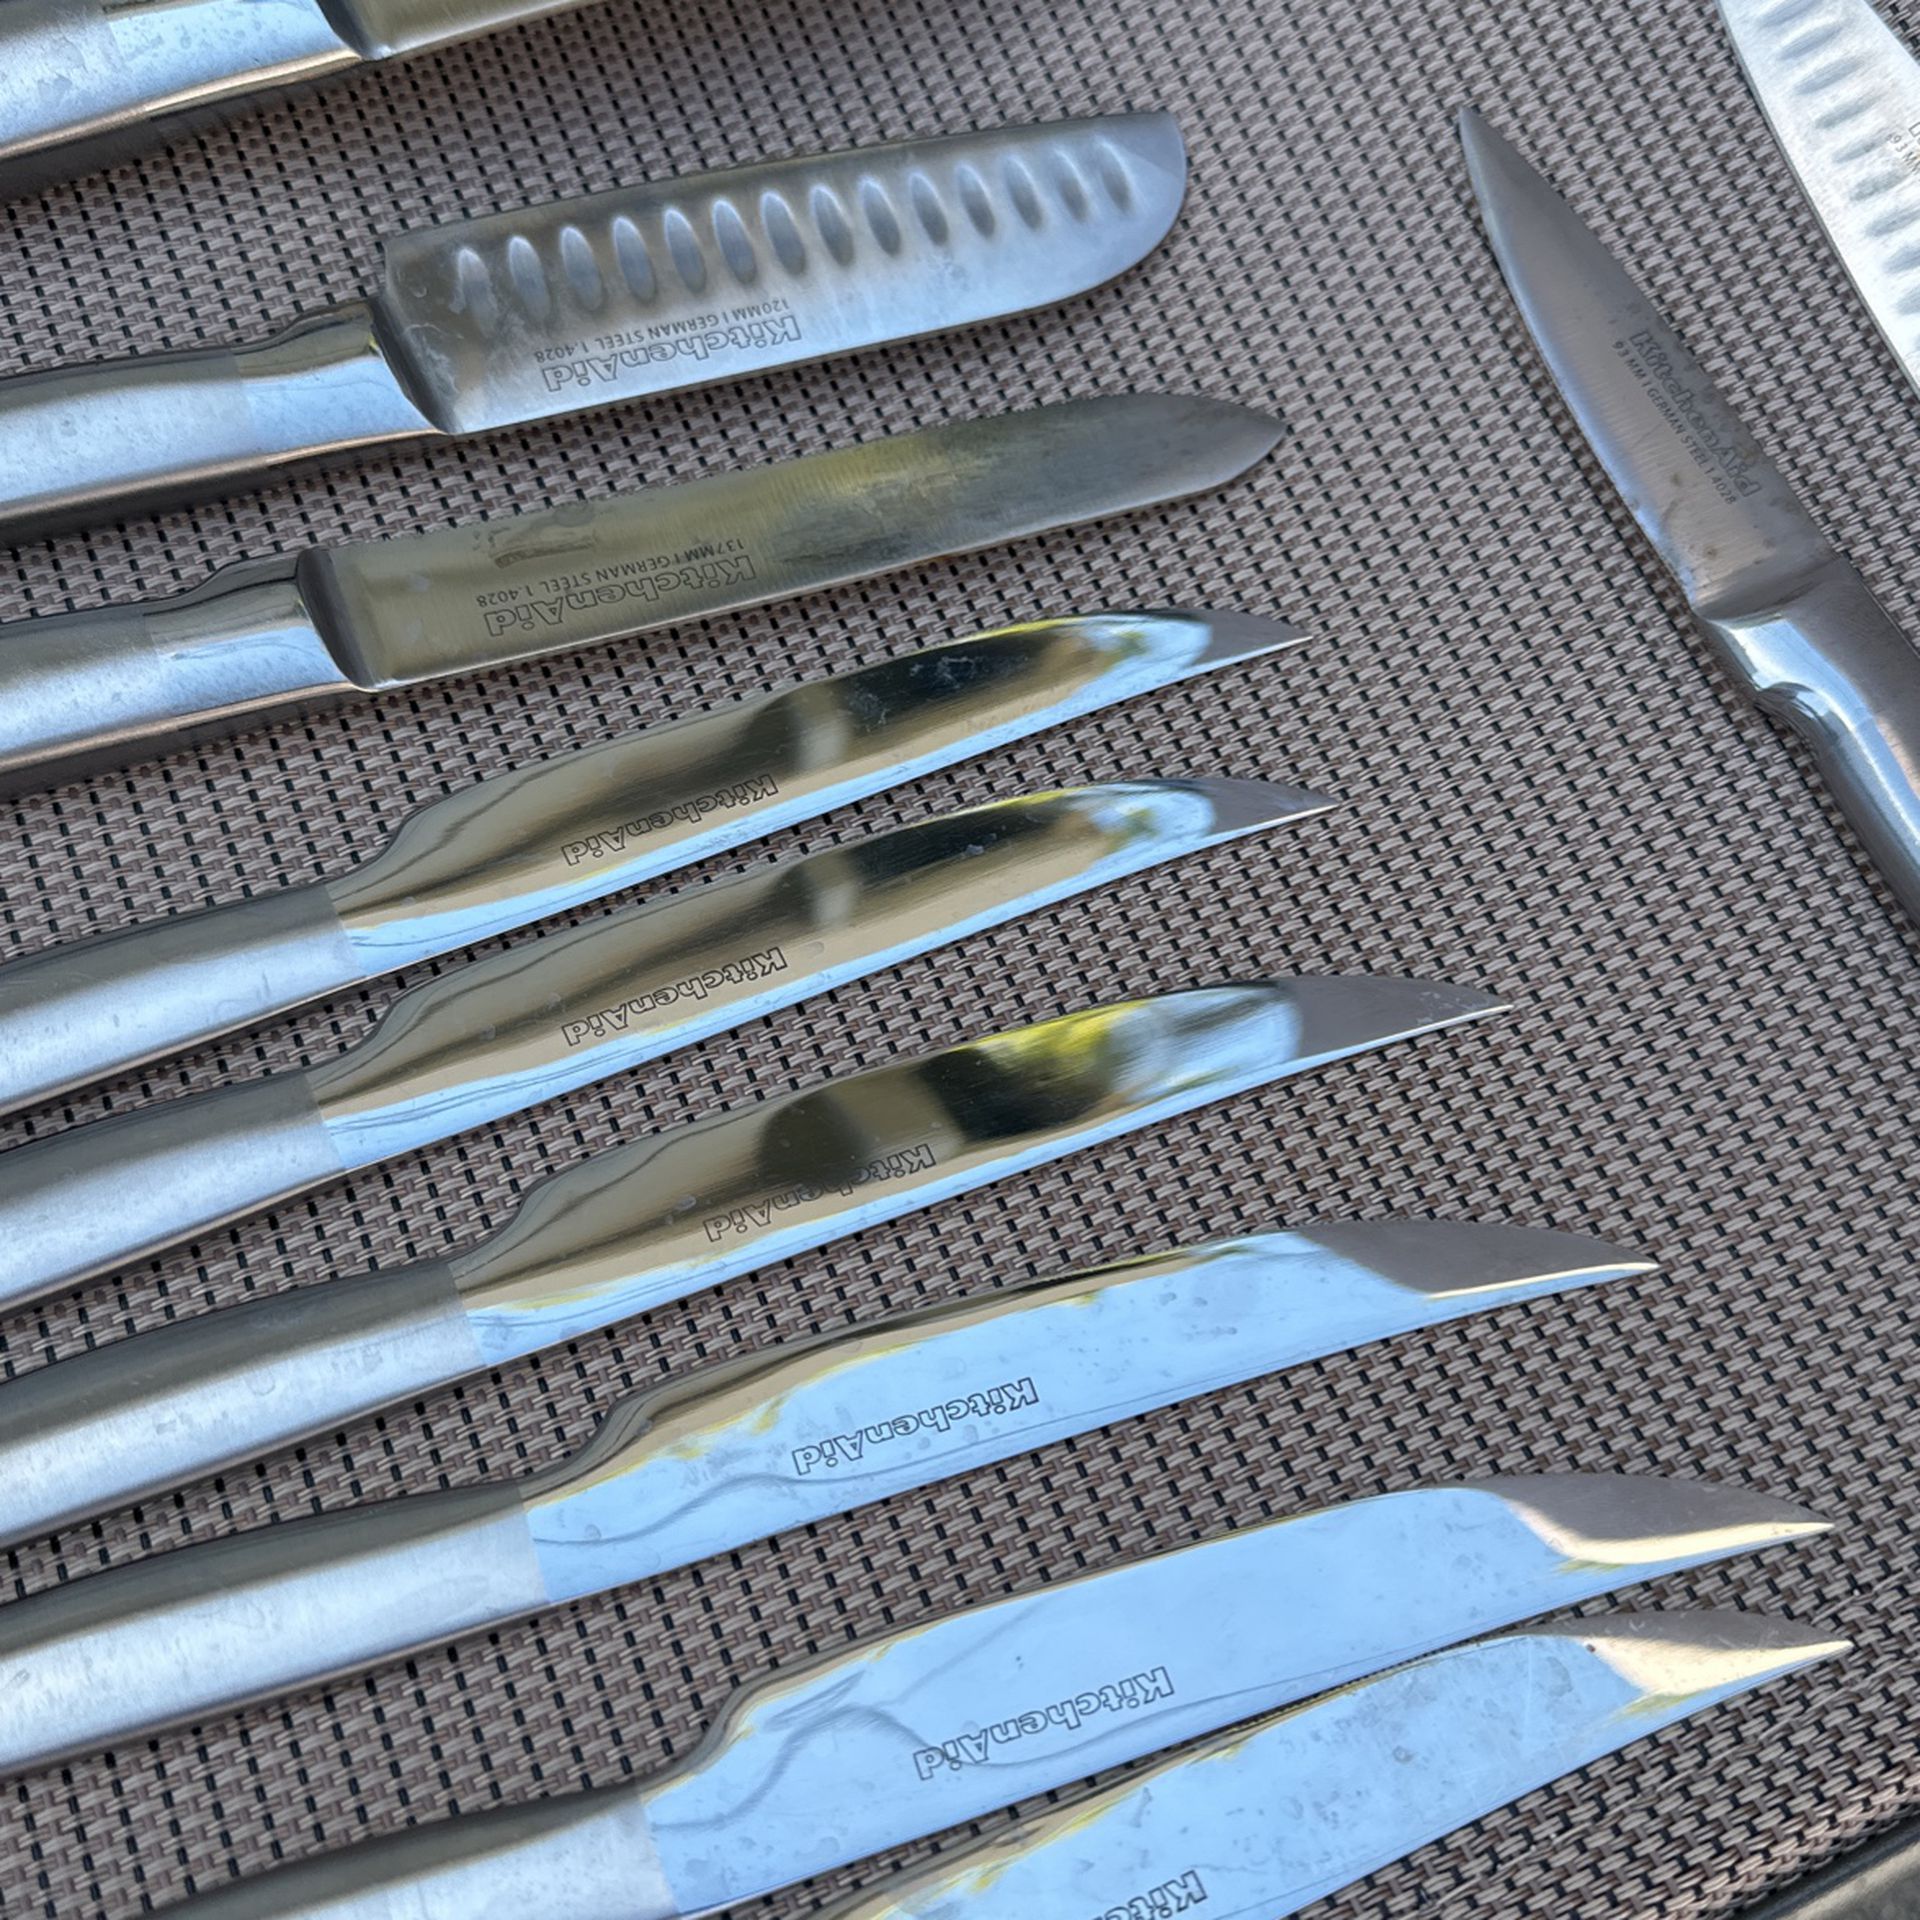 Emojoy 15pc Knife Set With Block for Sale in Temecula, CA - OfferUp